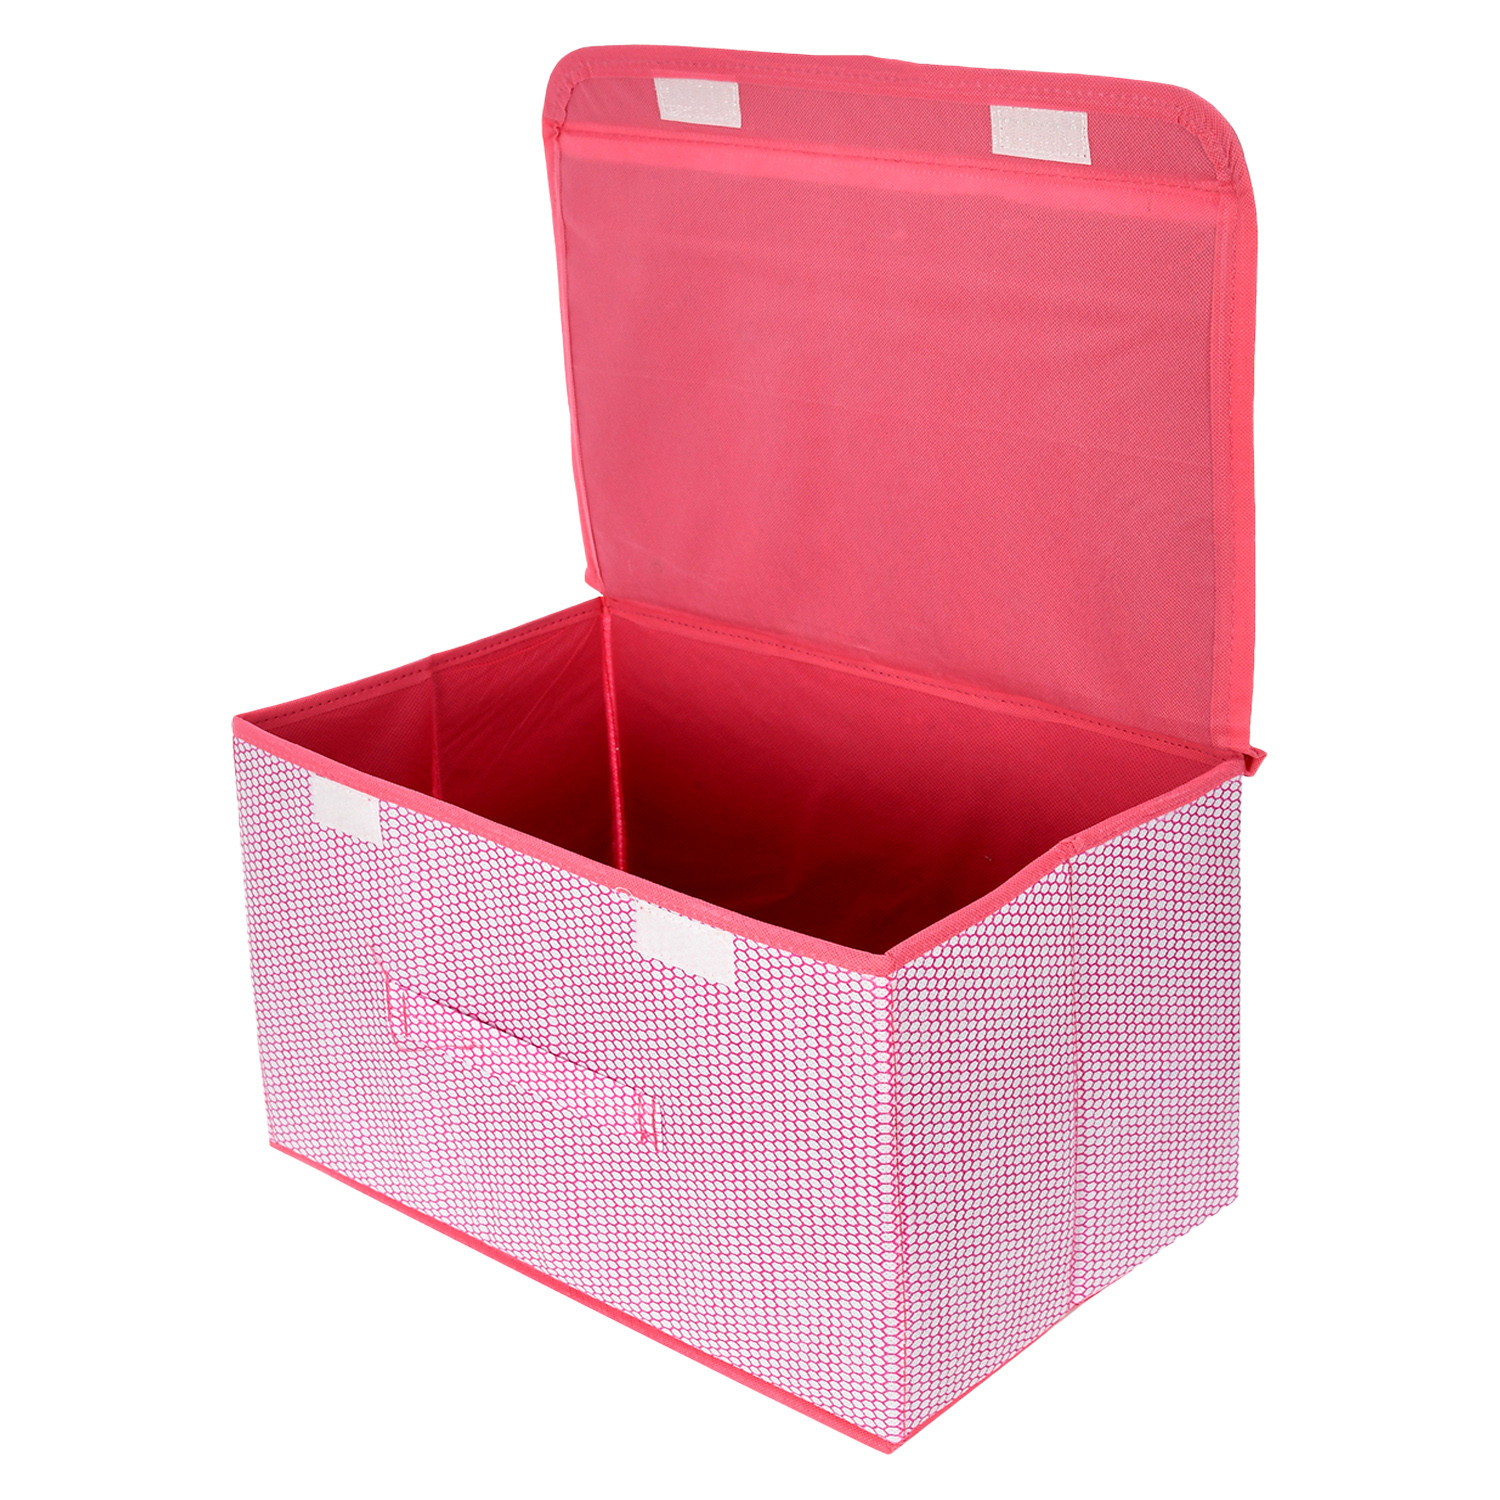 Kuber Industries Drawer Storage Box | Foldable Dhakkan Storage Box | Non-Woven Clothes Organizer For Toys | Storage Box with Handle | Large | Pack of 3 | Green & Pink